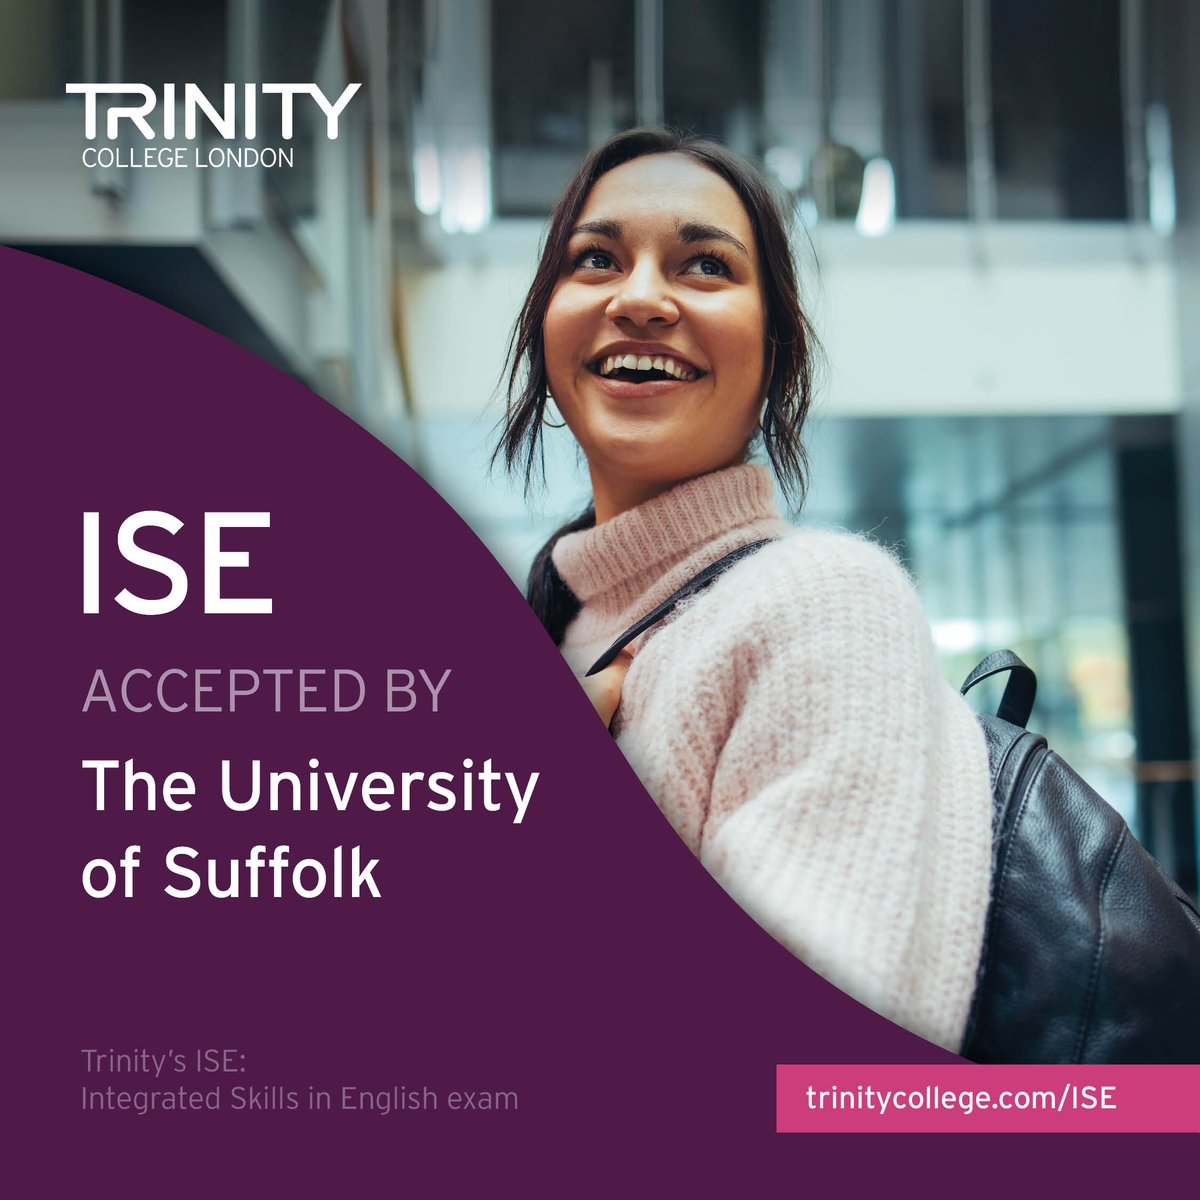 We're pleased to add the #UniversityofSuffolk to the growing list of UK universities that accept the #TrinityISE exam as proof of English language proficiency for entrance purposes. Learn more: hubs.la/Q01NP6xm0

#TrinityISE #UKELT #Qualifications #EnglishProficiency